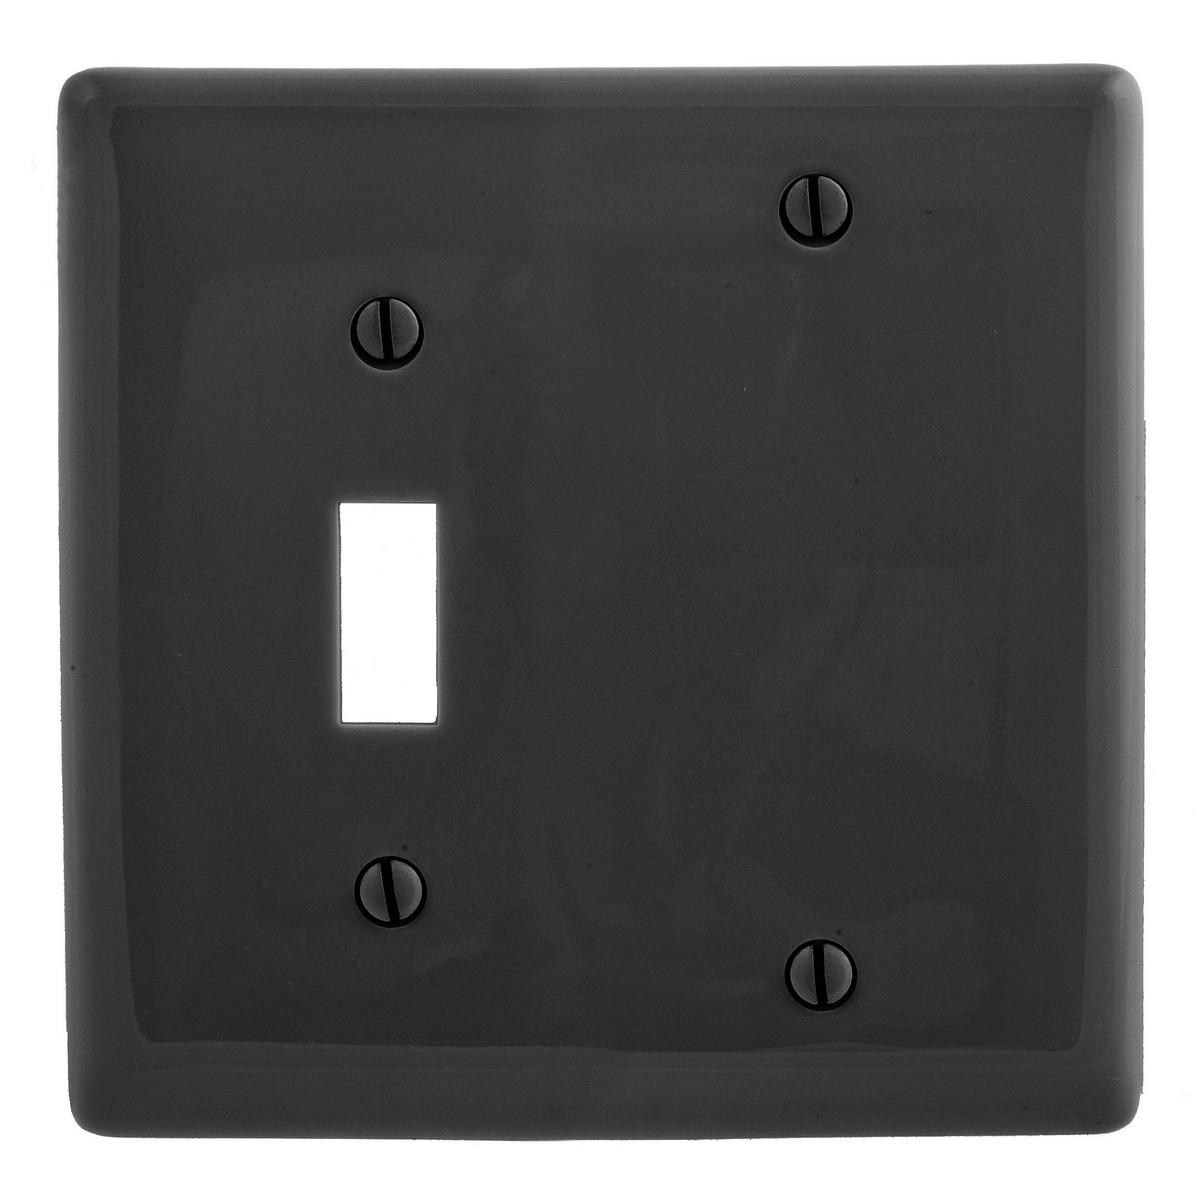 Hubbell NP113BK Wallplates, Nylon, 2-Gang, 1) Toggle, 1) Blank, Black  ; Reinforcement ribs for extra strength ; High-impact, self-extinguishing nylon material ; Captive screw feature holds mounting screw in place ; Standard Size is 1/8" larger to give you extra coverage